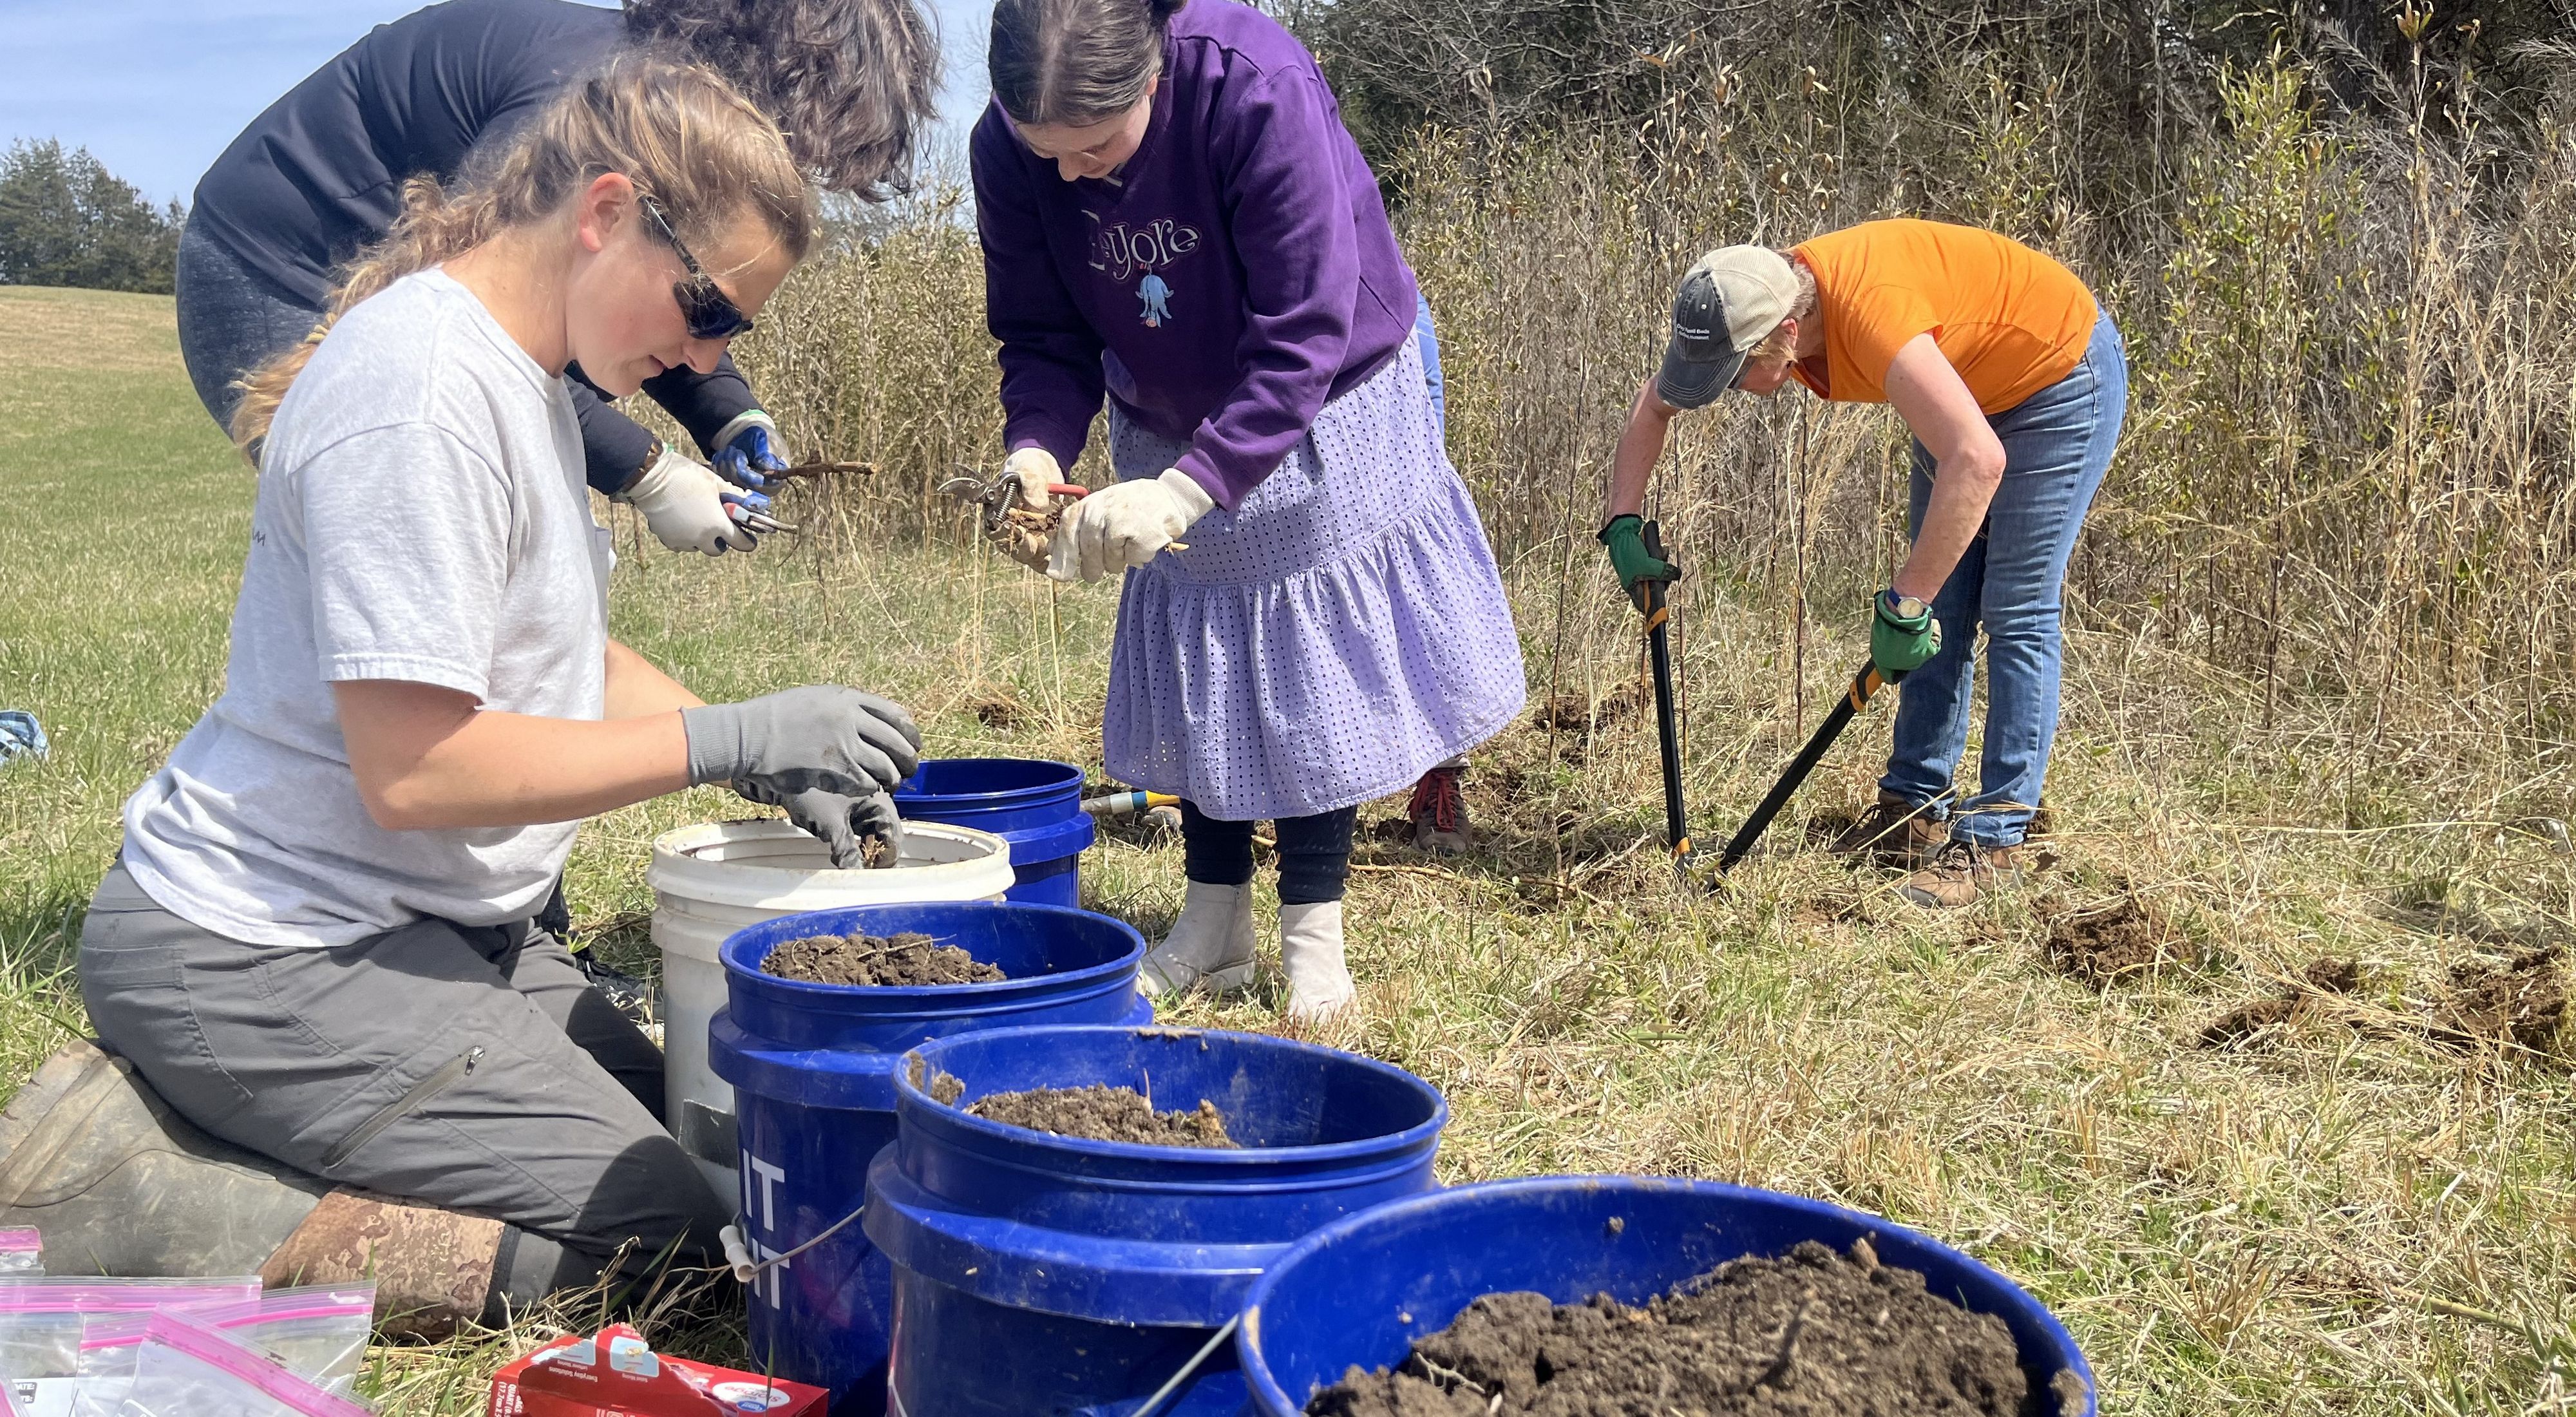 Three volunteers work in front of buckets of dirt and one works with shears in support of the Virginia Department of Conservation and Recreation's (DCR) native river cane restoration project.